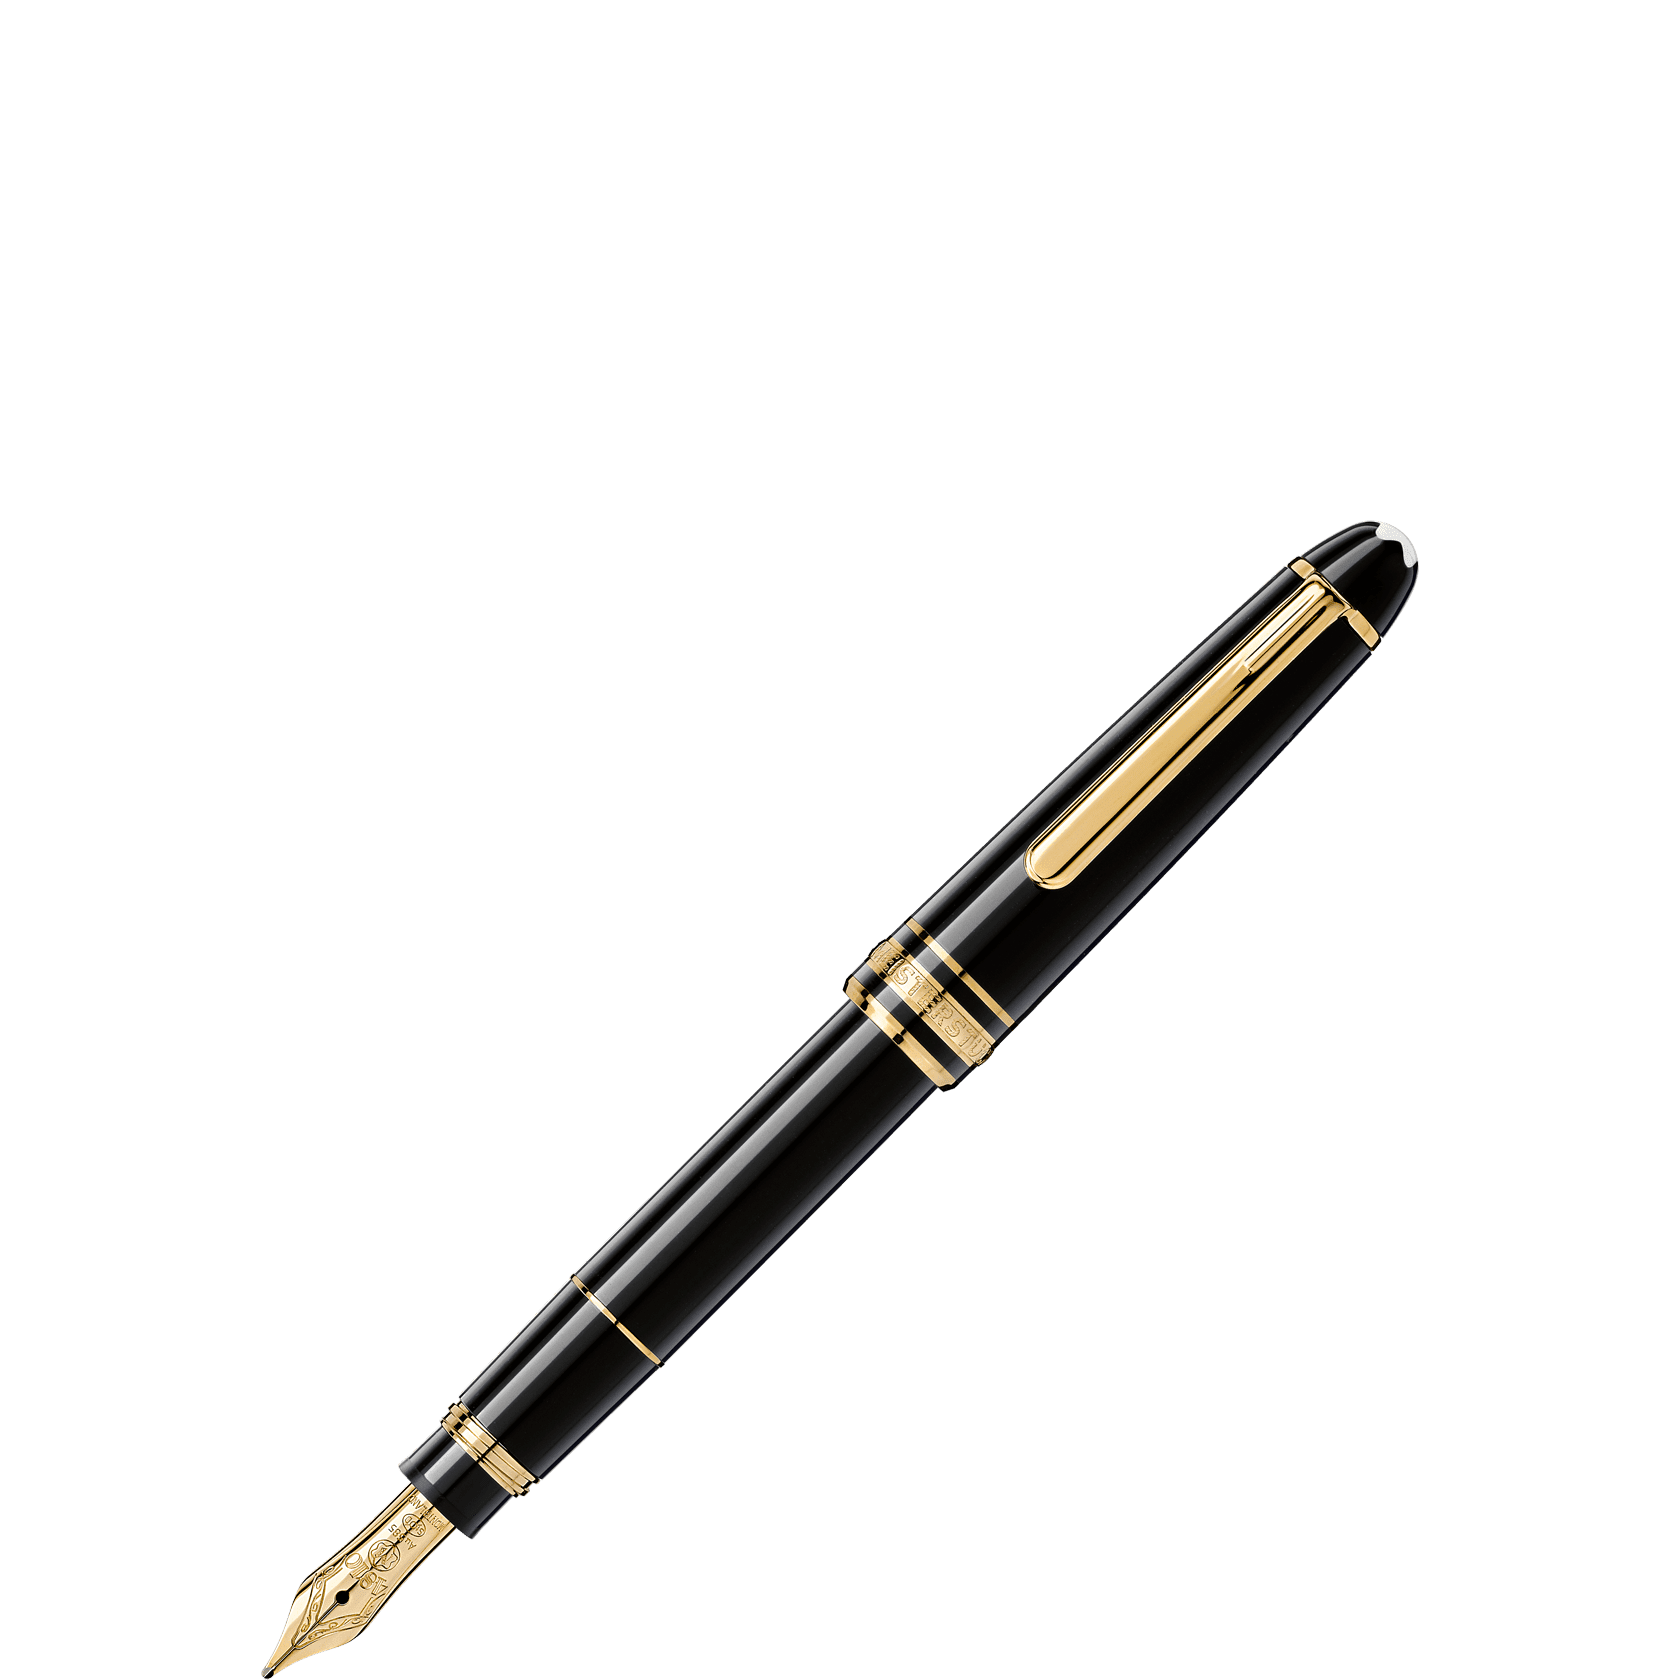 MeisterstÃ¼ck Homage to W.A. Mozart Fountain Pen (small size)